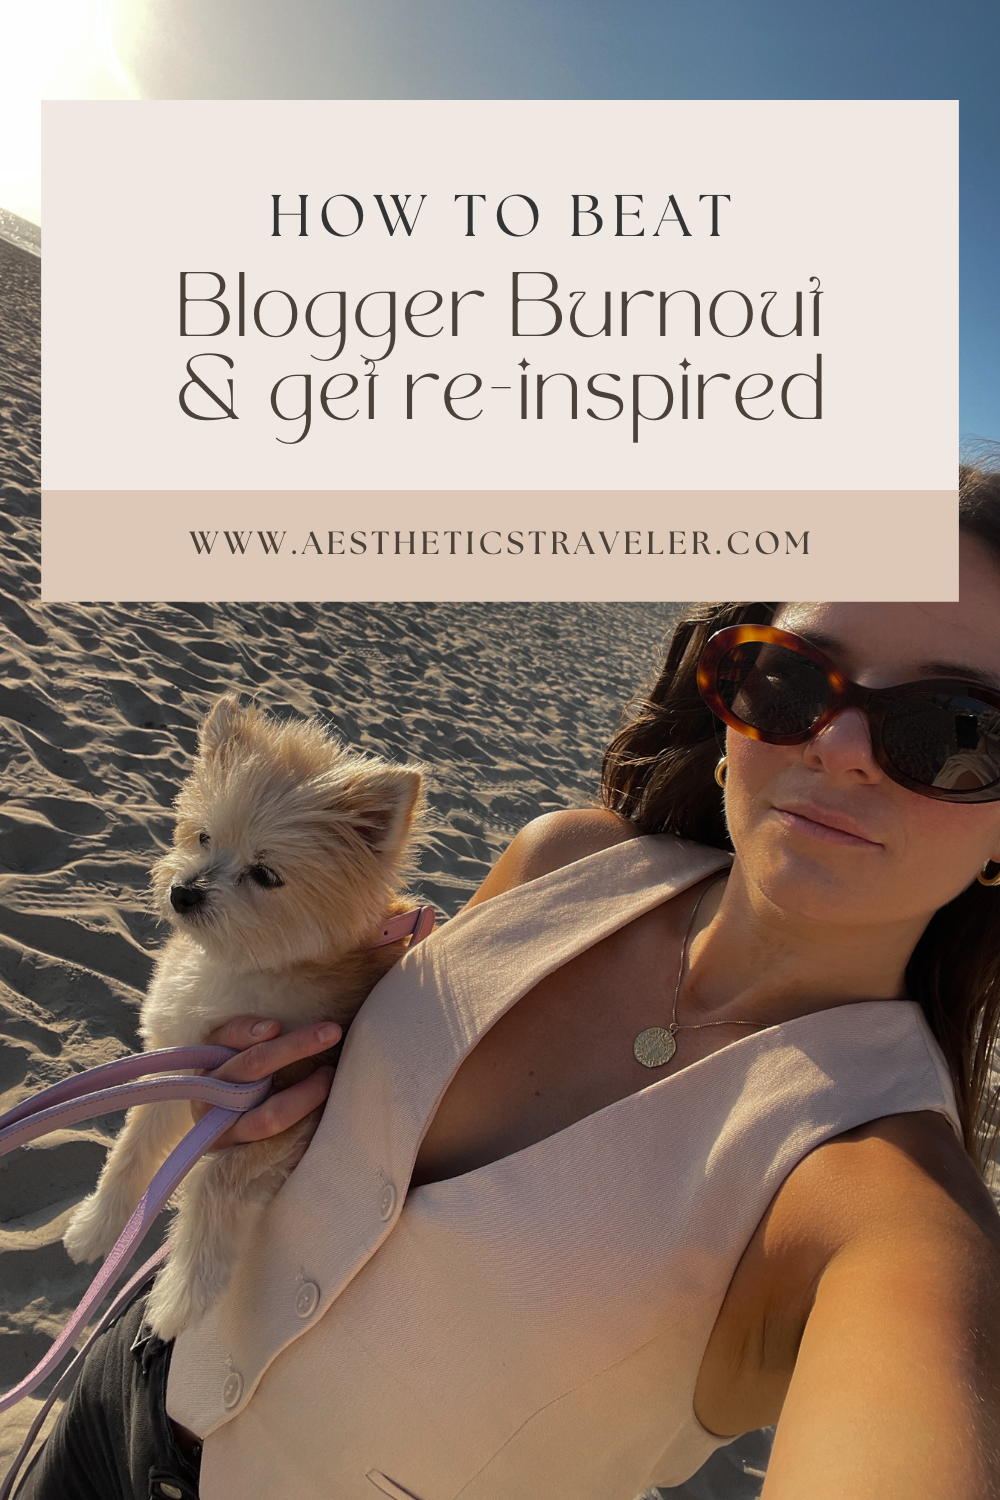 How To Beat Blogger Burnout And Find Fresh Content Ideas | www.aestheticstraveler.com Your go-to resource for travel blogging tips and tricks from a 10-year travel blogger and influencer marketing professional